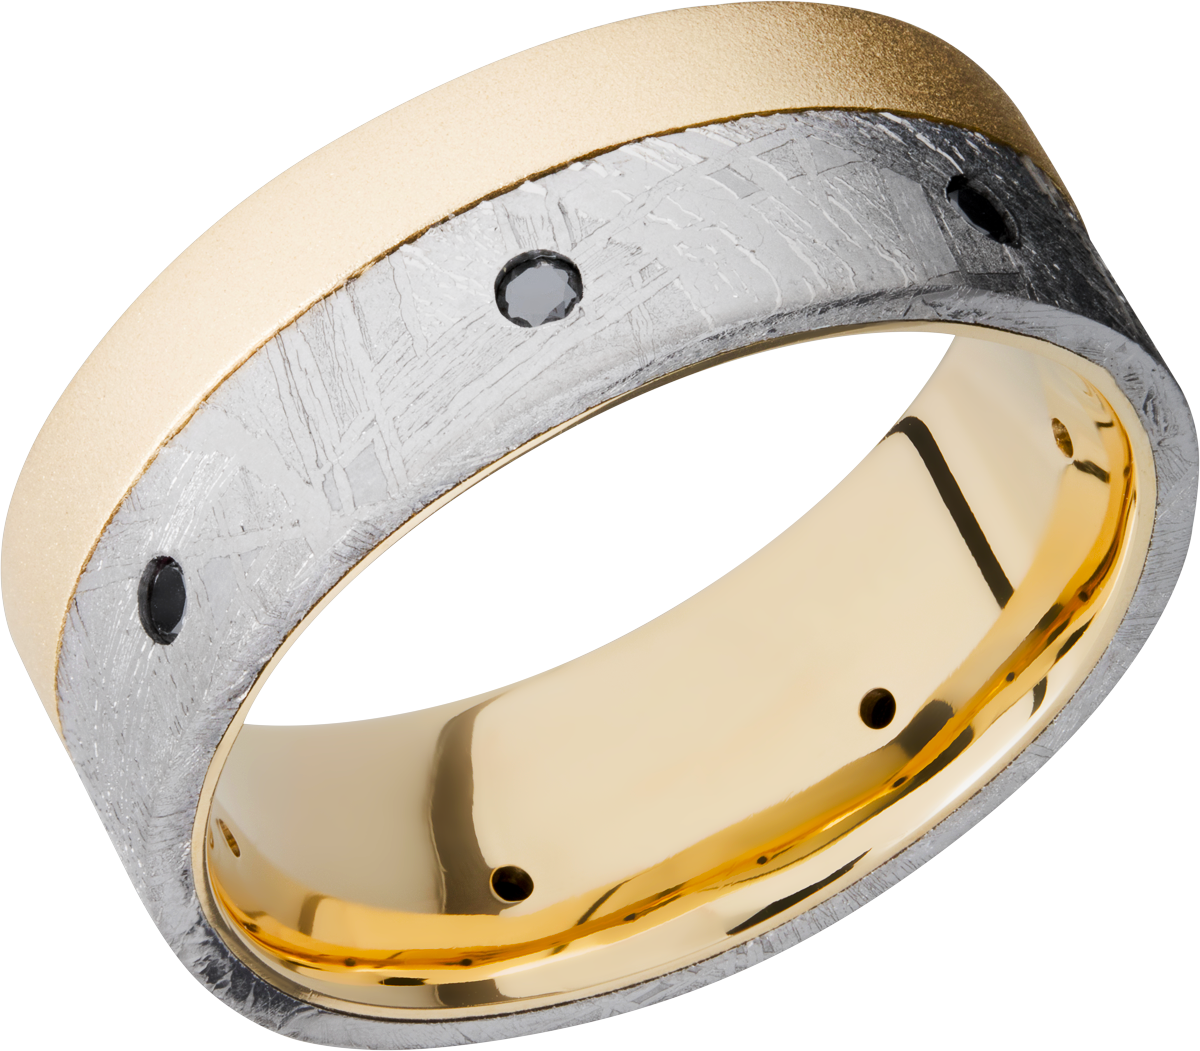 18k yellow gold 8mm flat band with one inlay that is 5mm wide set off center all the way to one edg